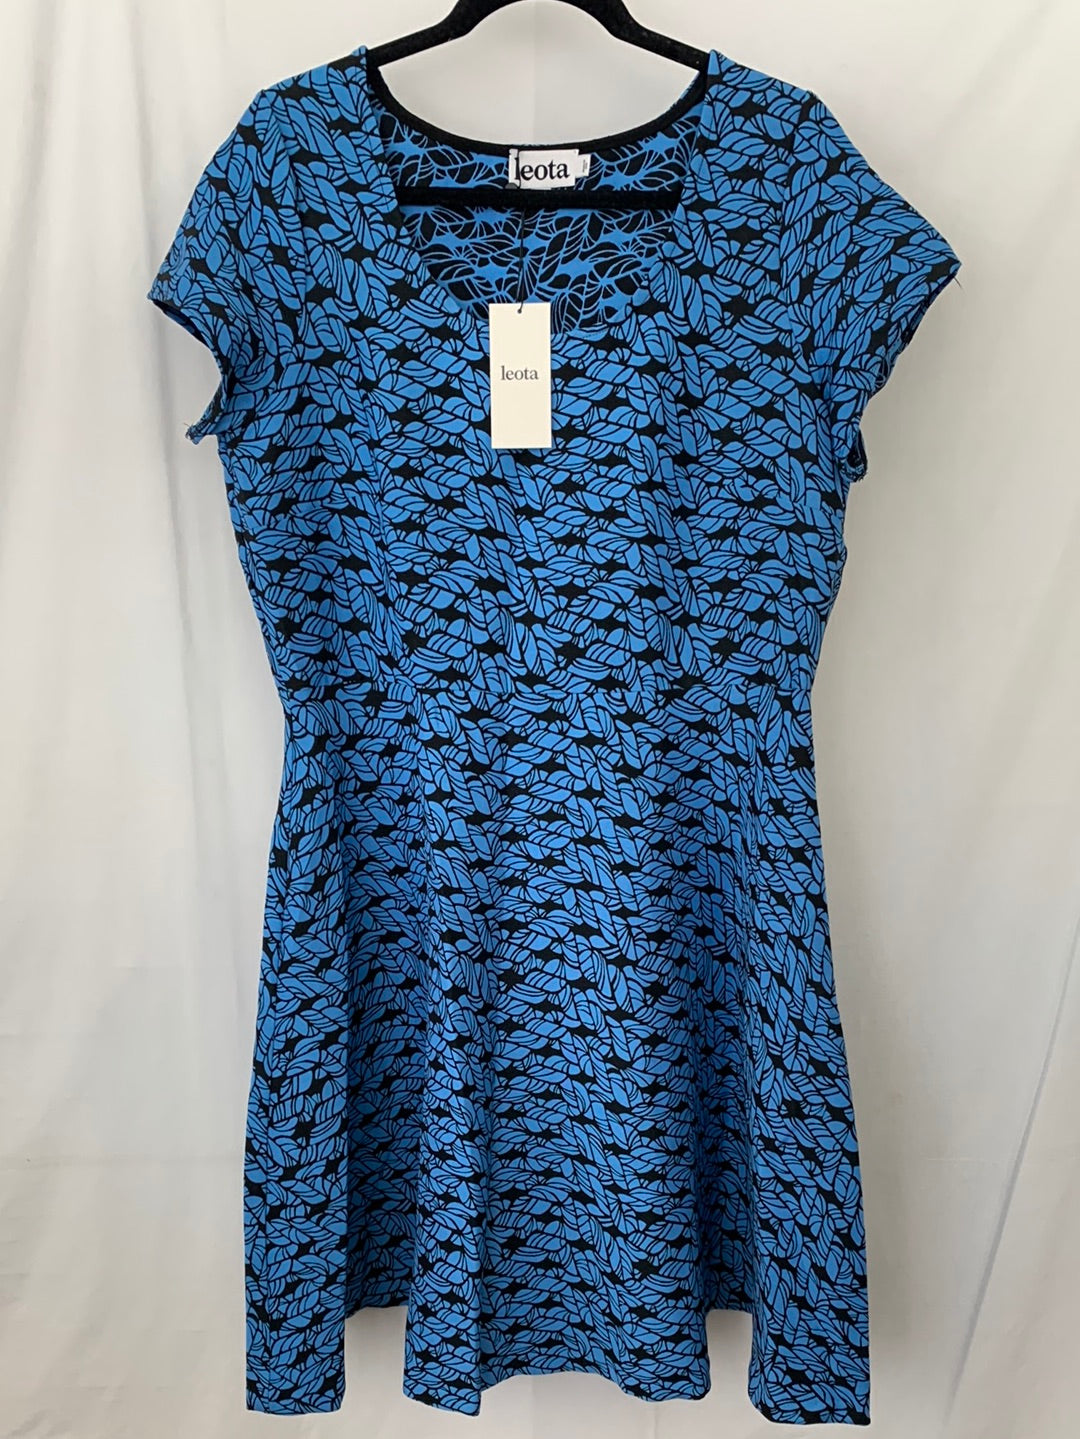 NWT - LEOTA blue Knotted Rope* print Fit and Flare Dress - Size 1L (14-16)